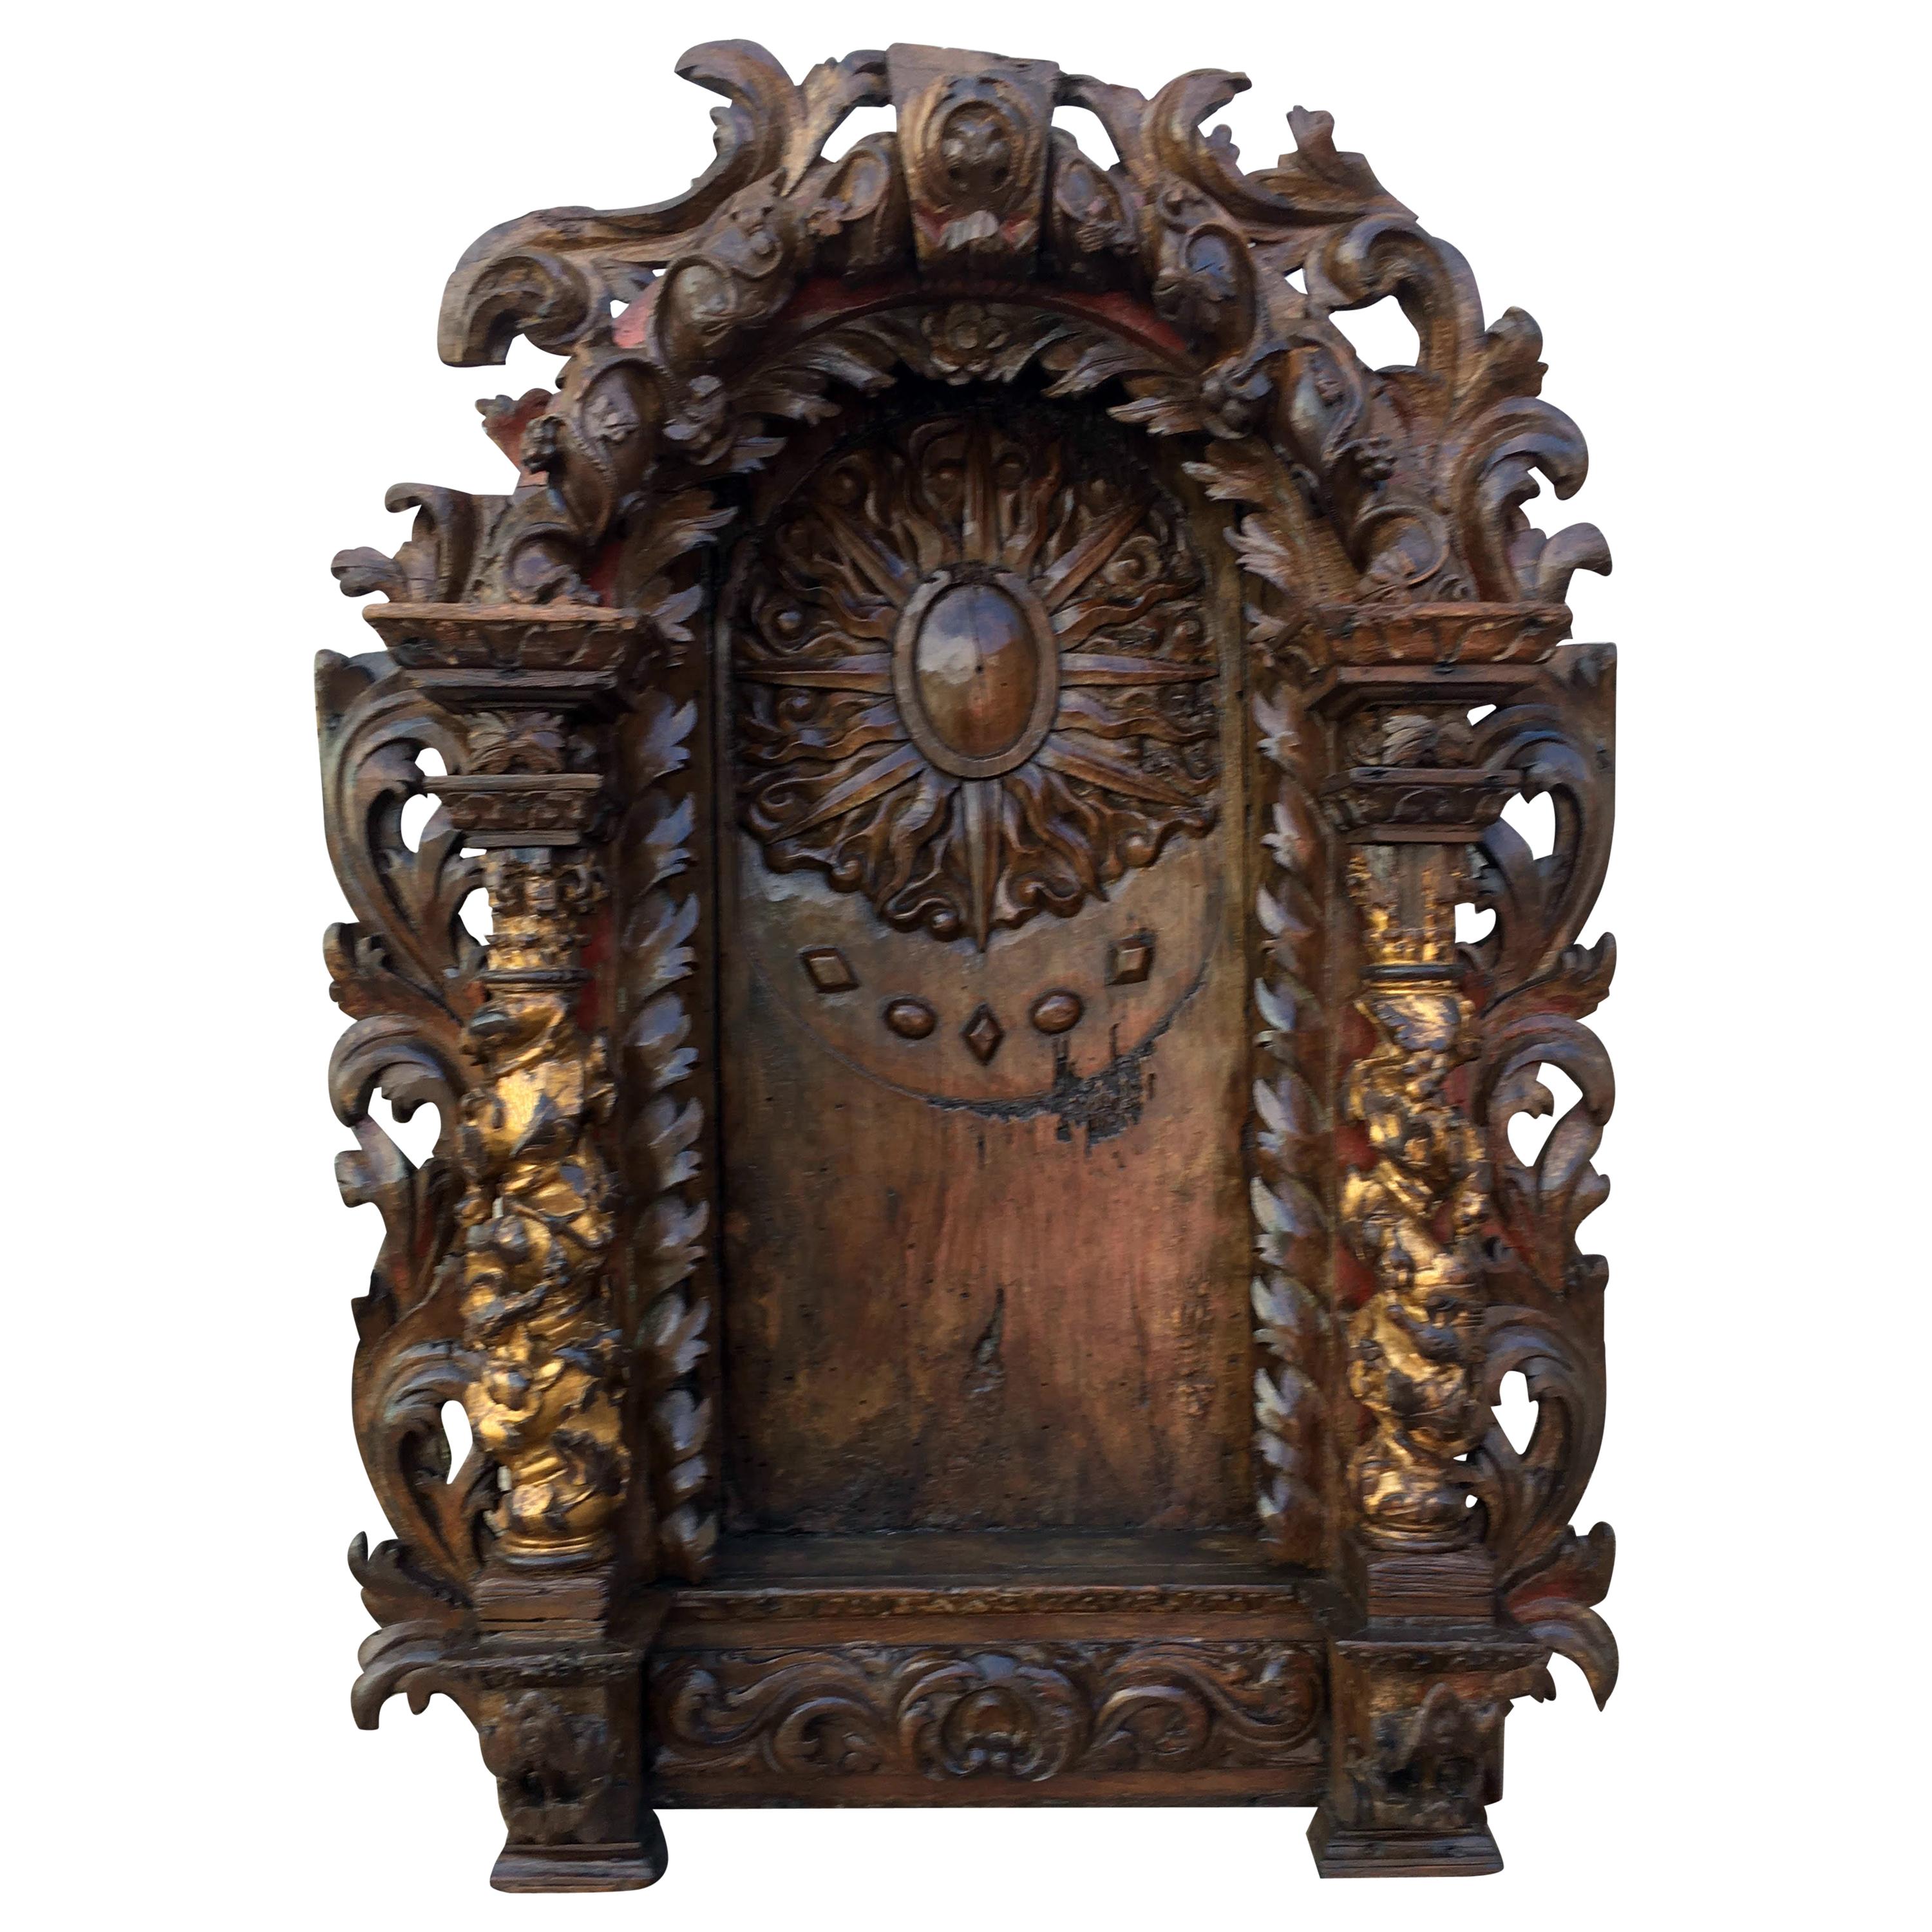 Portuguese, 18th Century Carved Wood Oratory